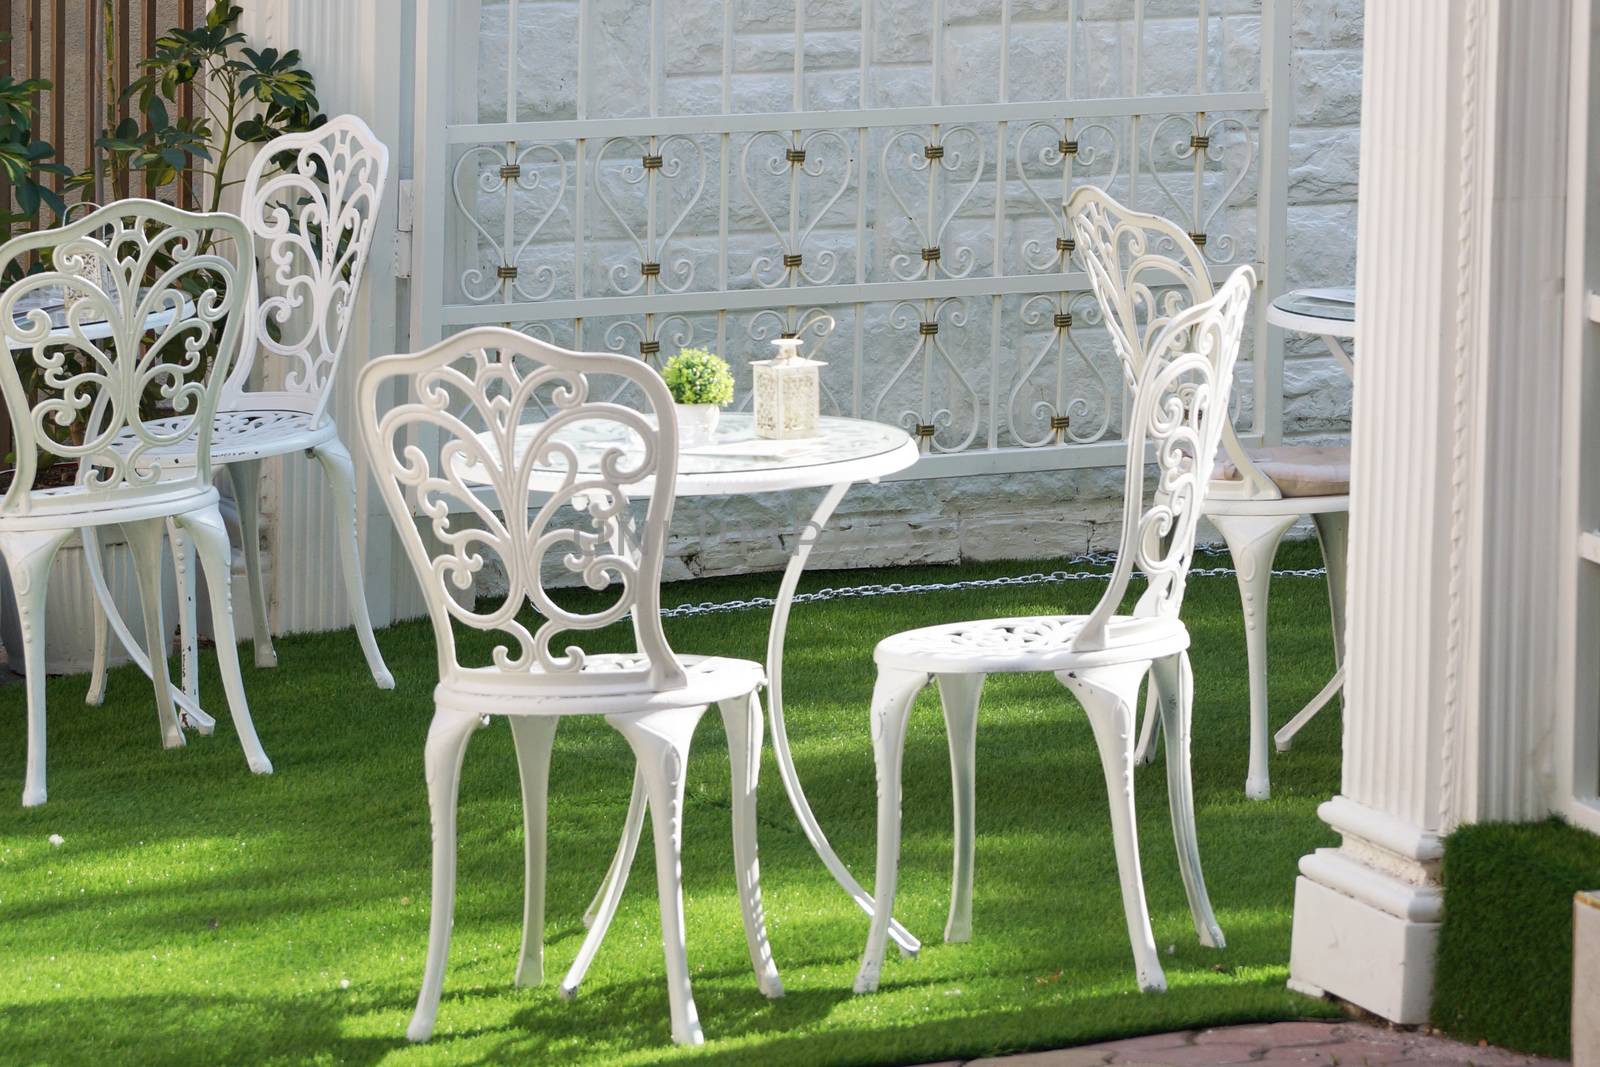 openwork white metal tables and chairs on a green lawn. by Annado